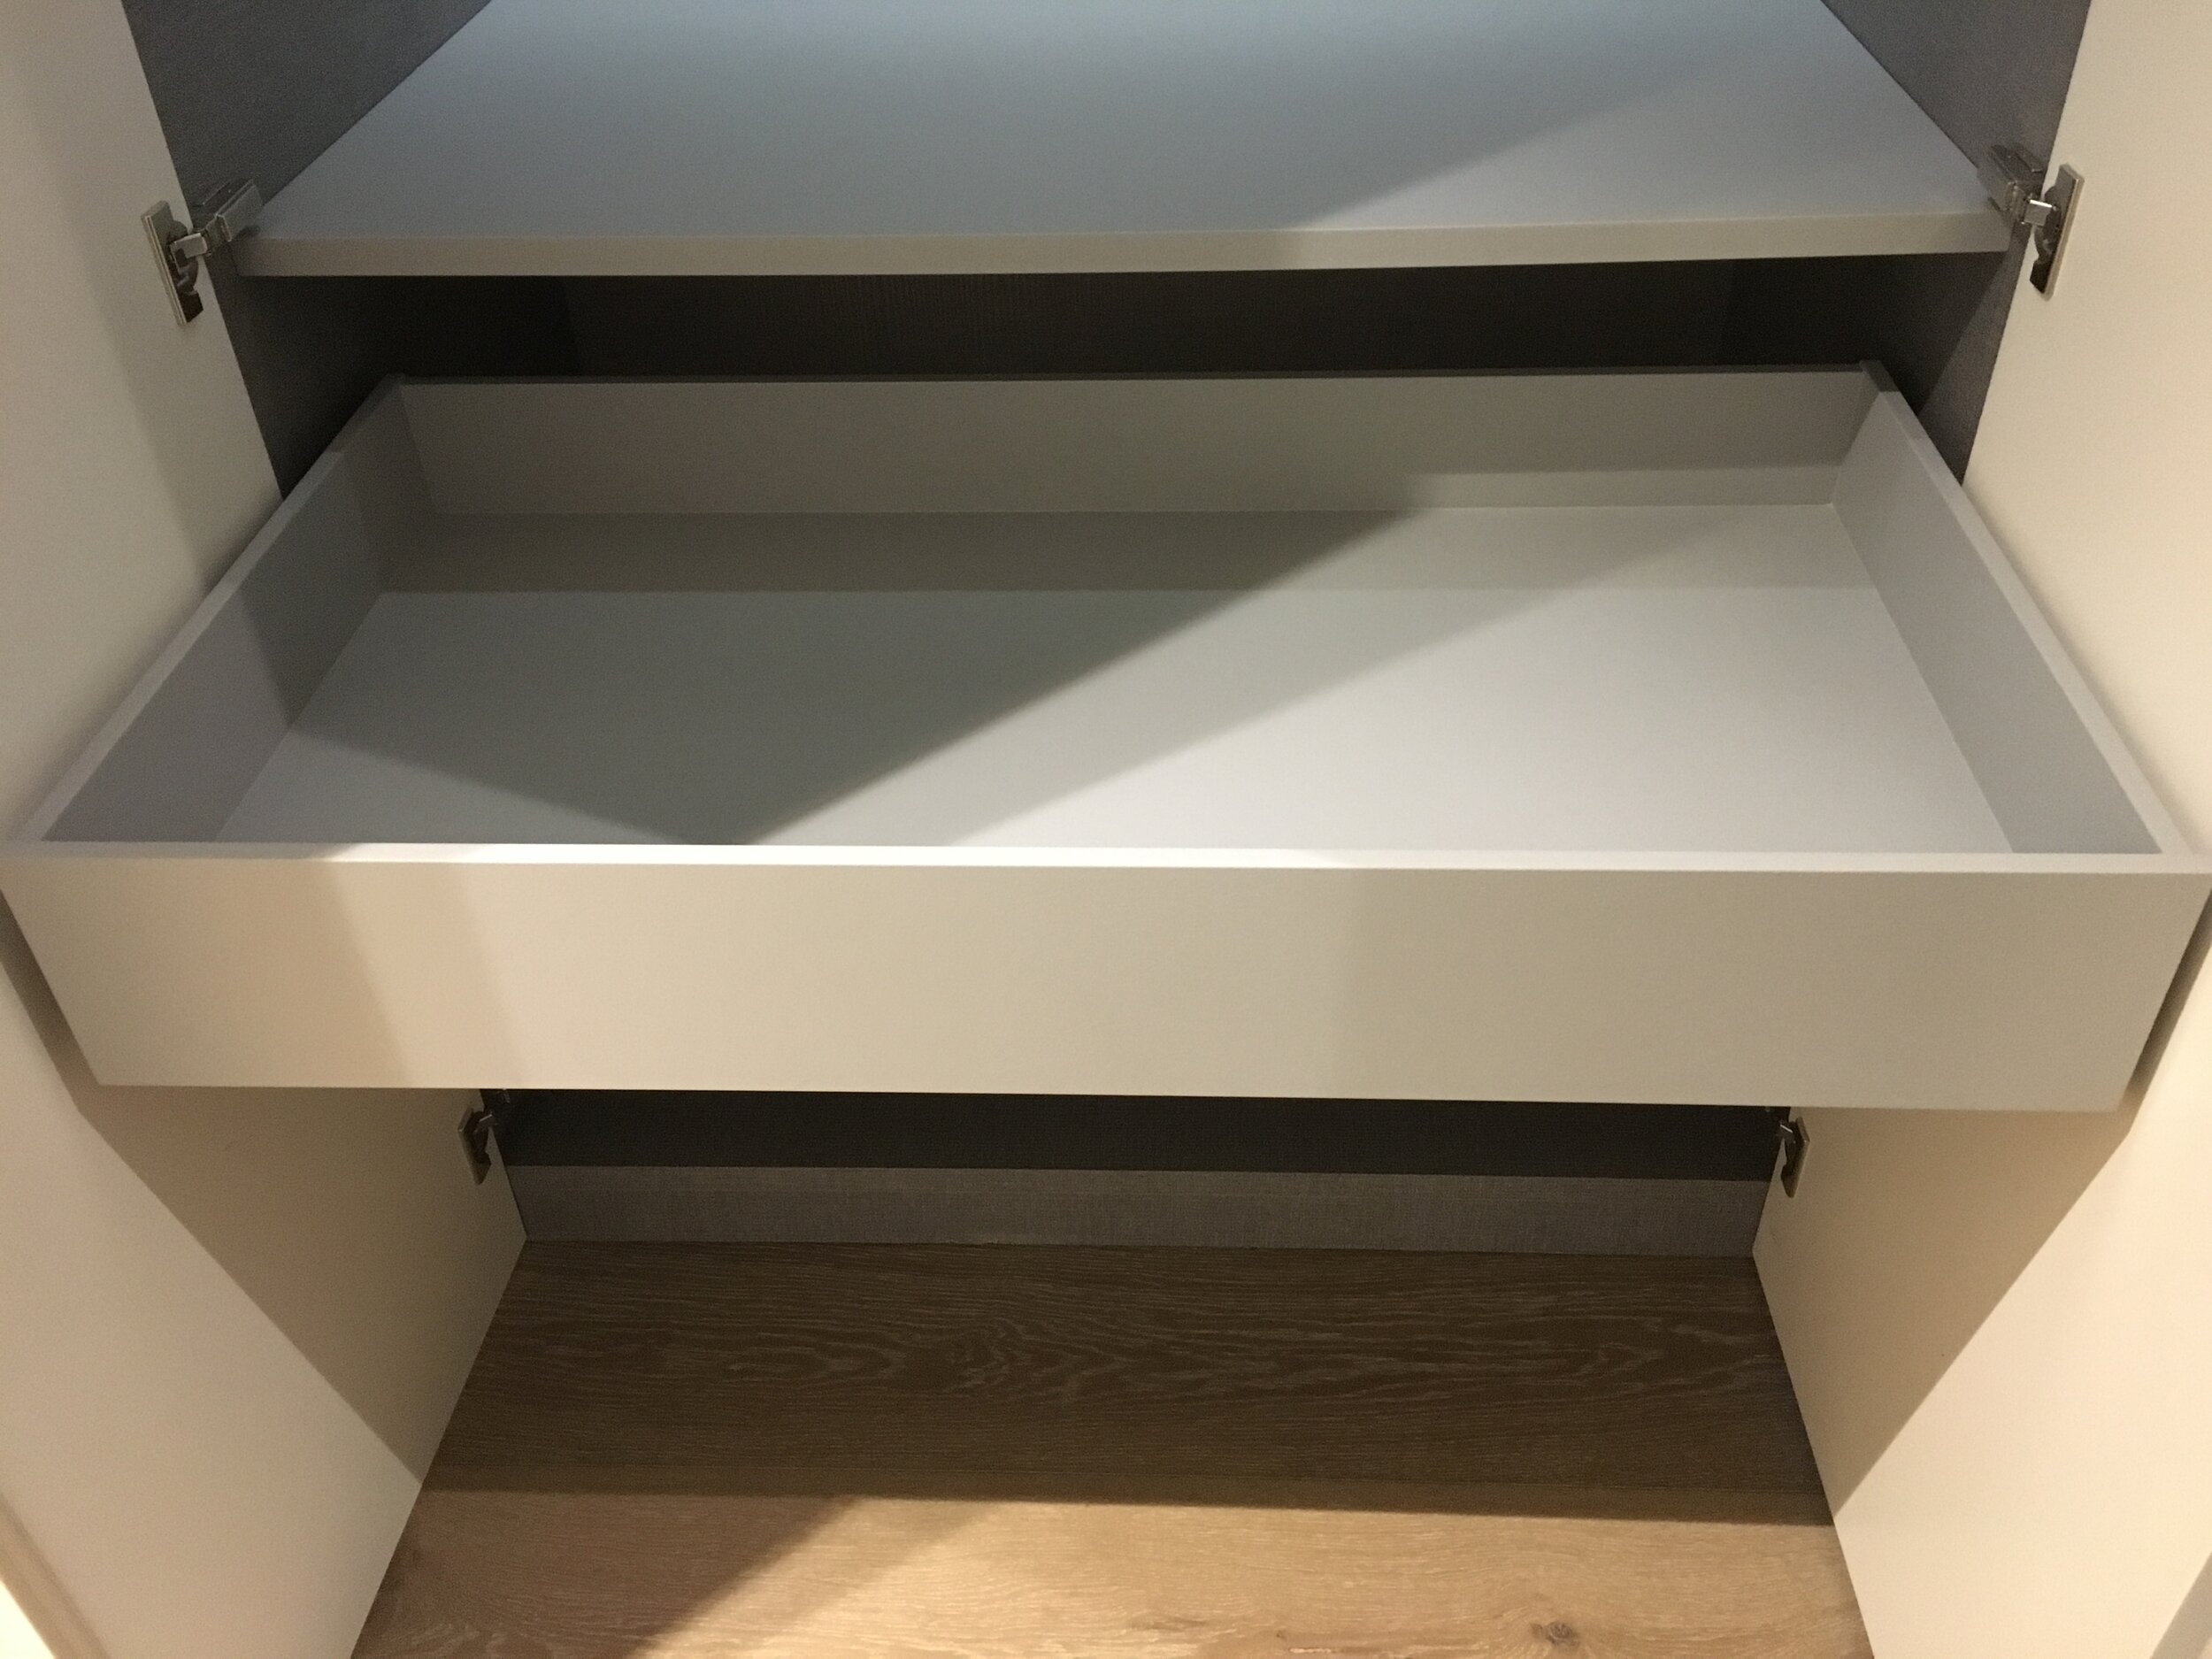 Front-less drawer boxes - for shoe storage.